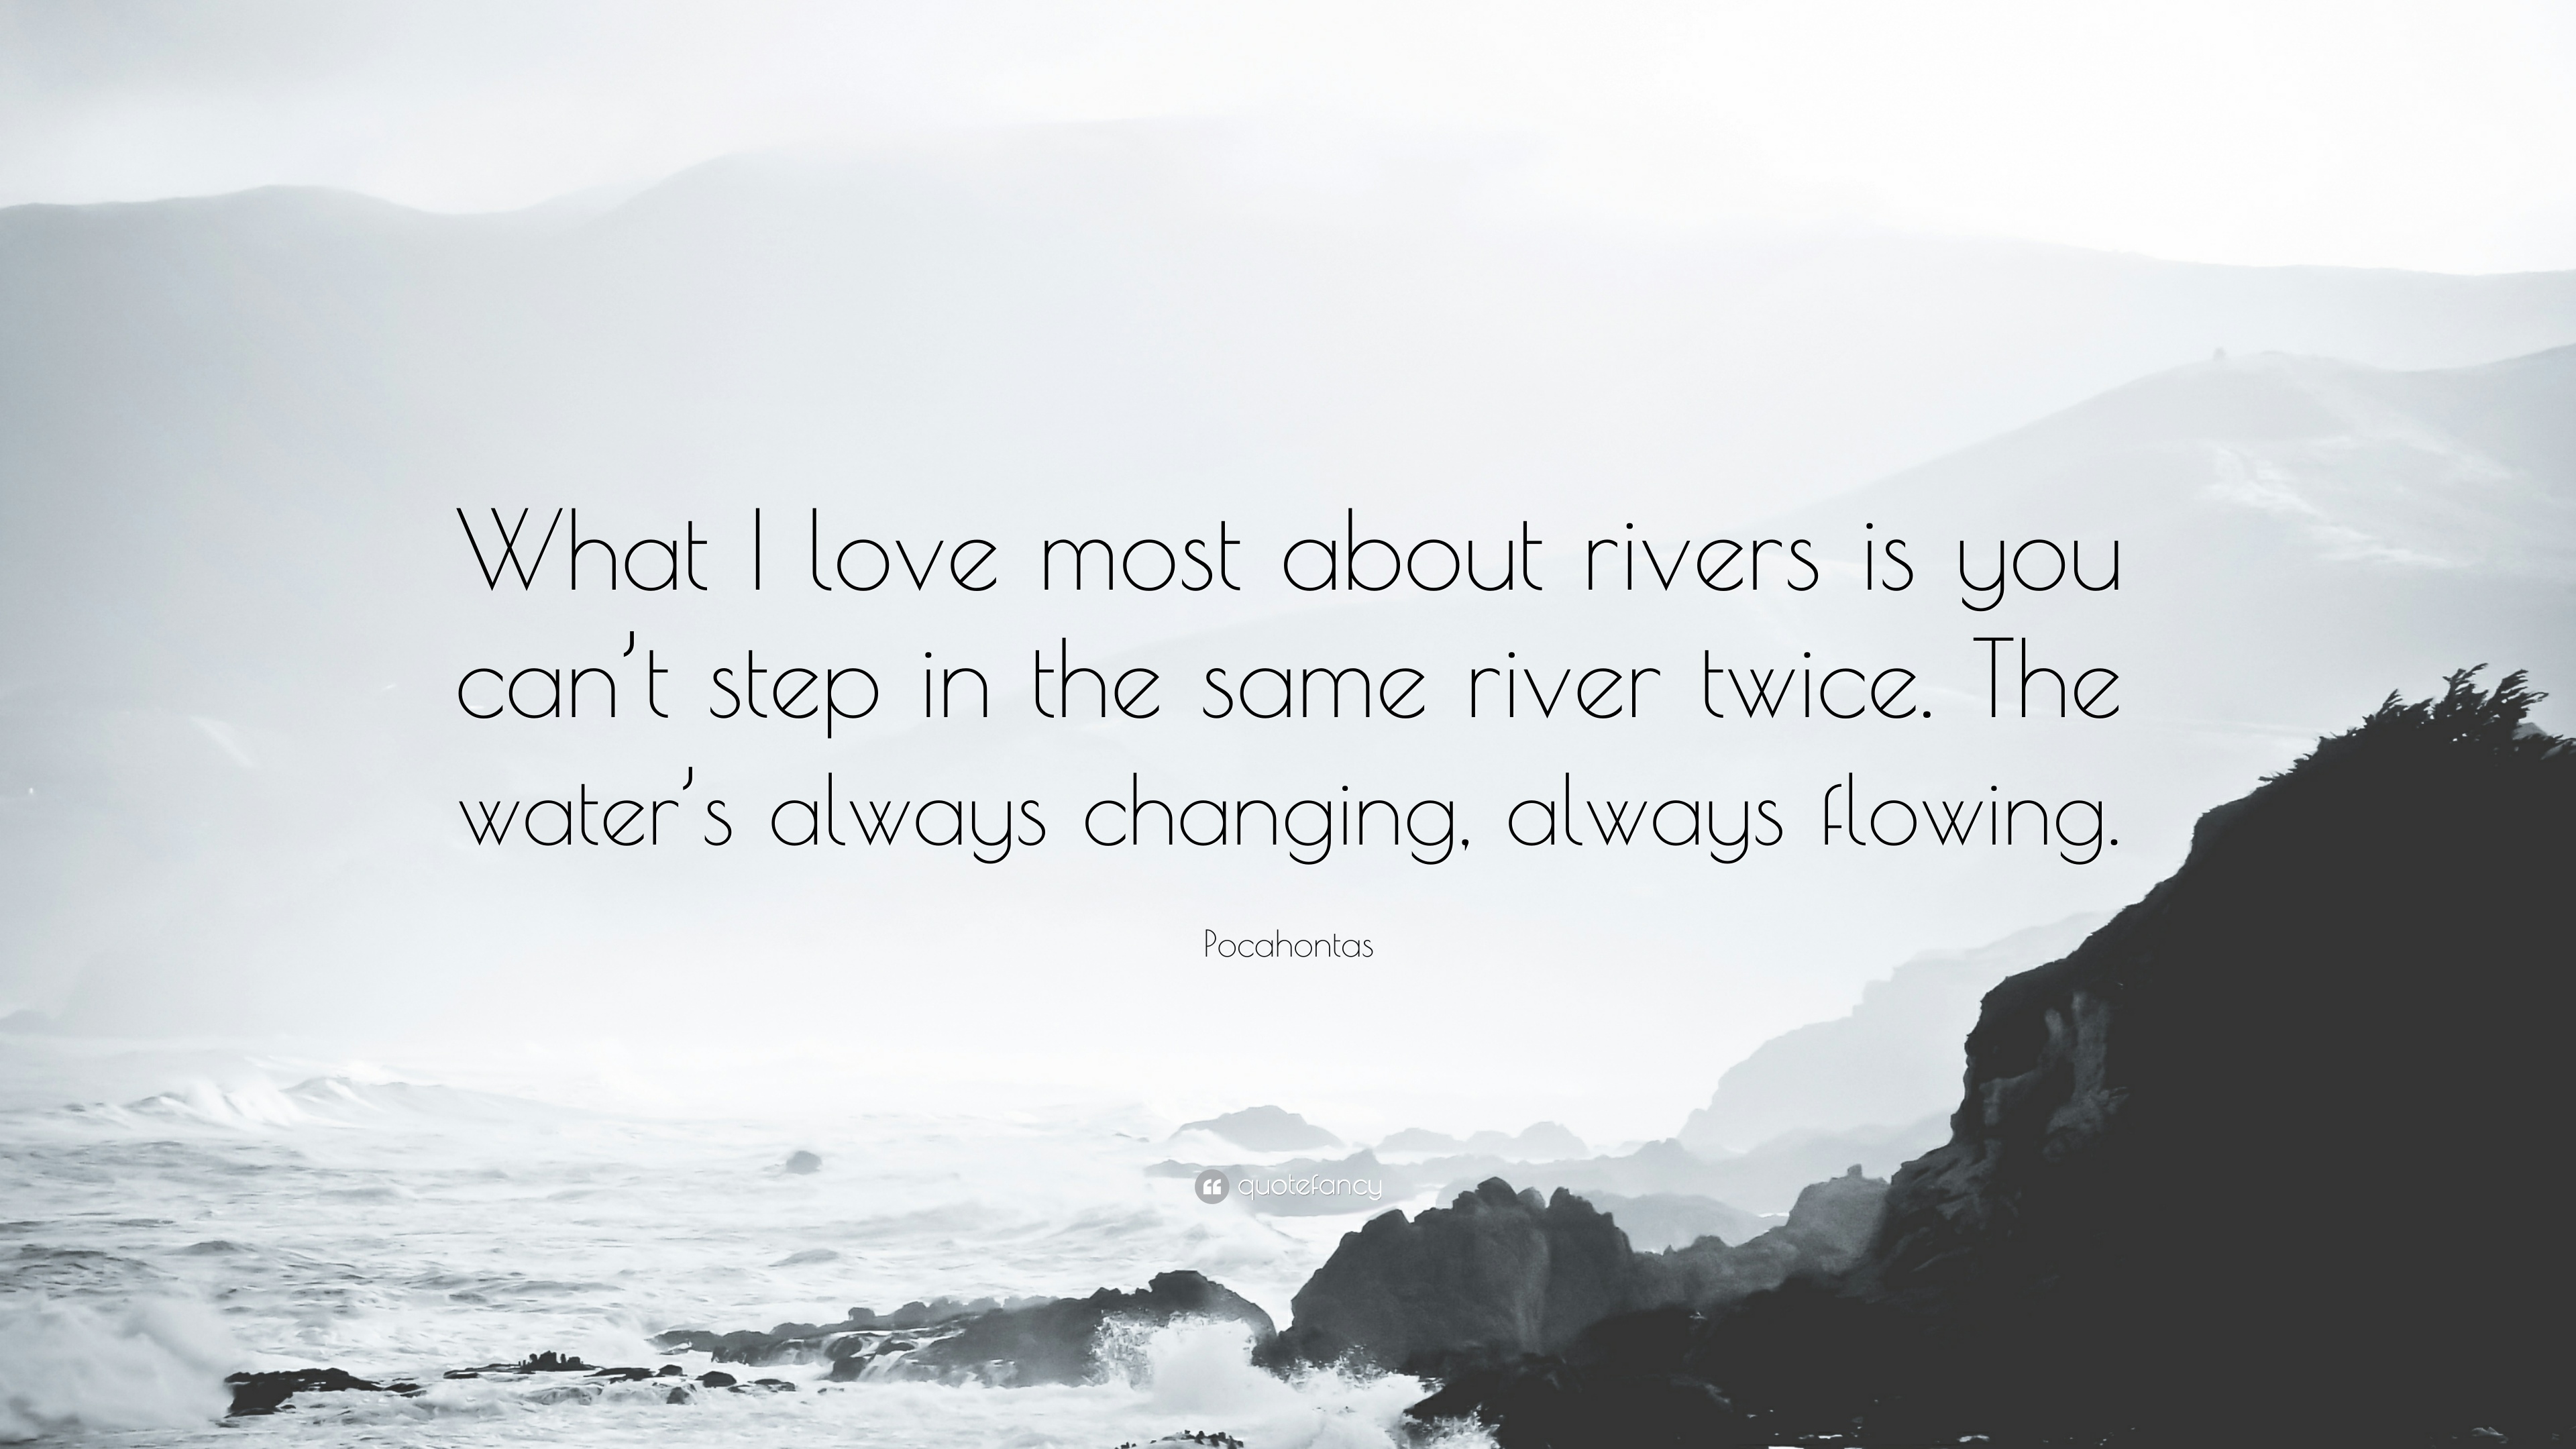 Pocahontas Quote: “What I love most about rivers is you can't step